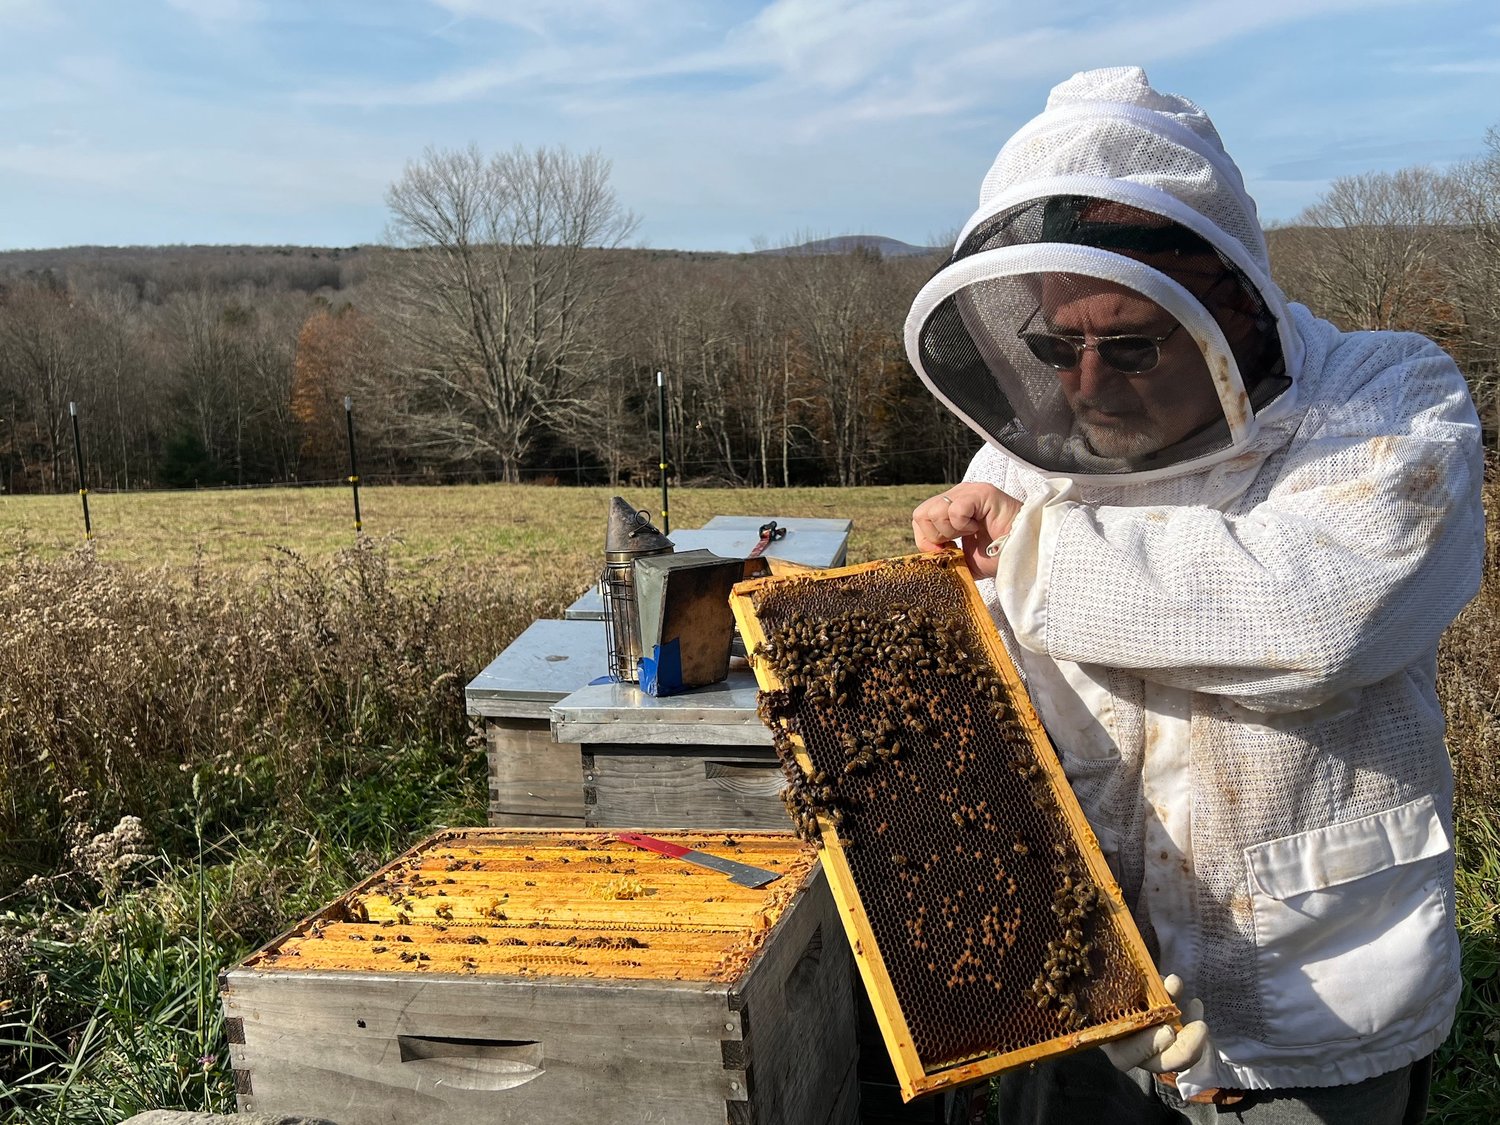 SUNY Sullivan economics professor and campus beekeeper Art Riegal gets the hives ready for winter.